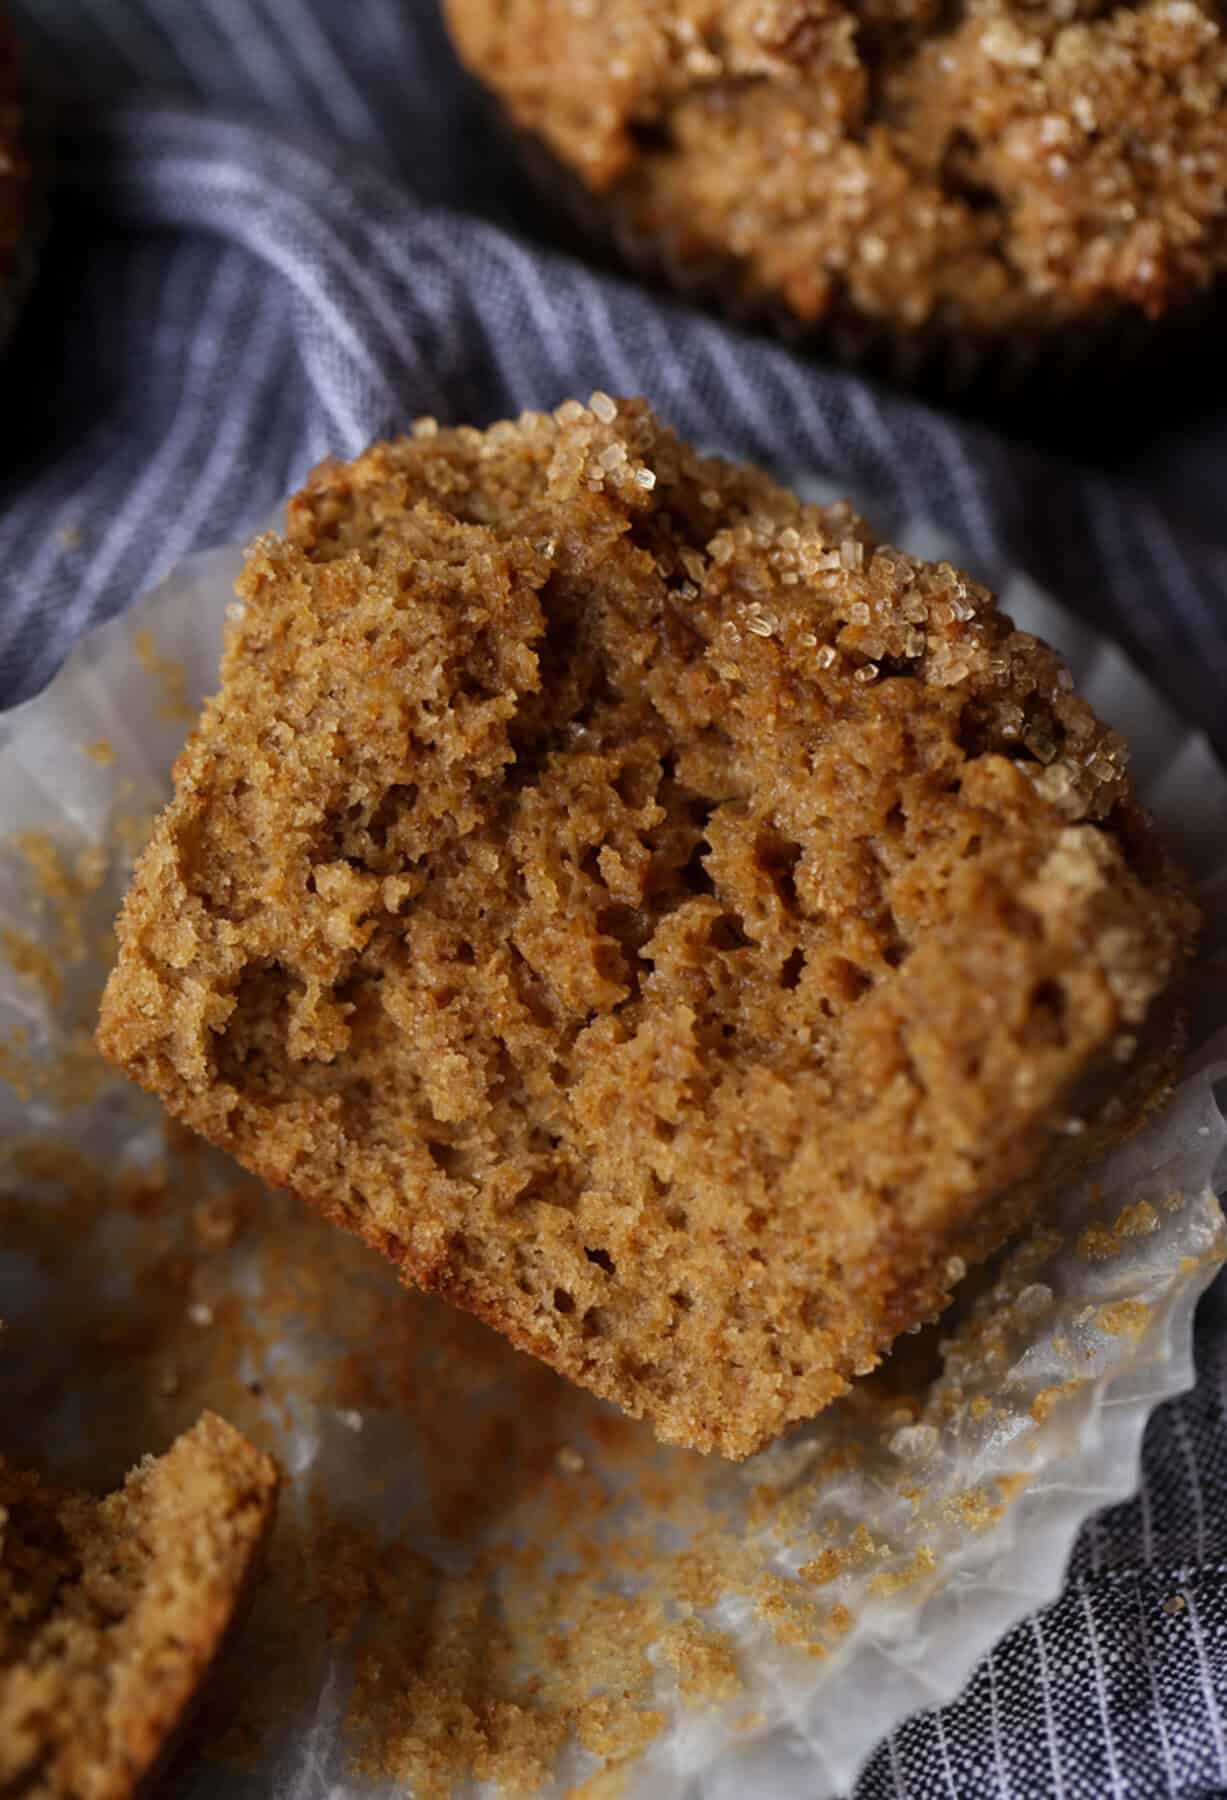 Close up of one half of a bran muffin resting in a paper liner.